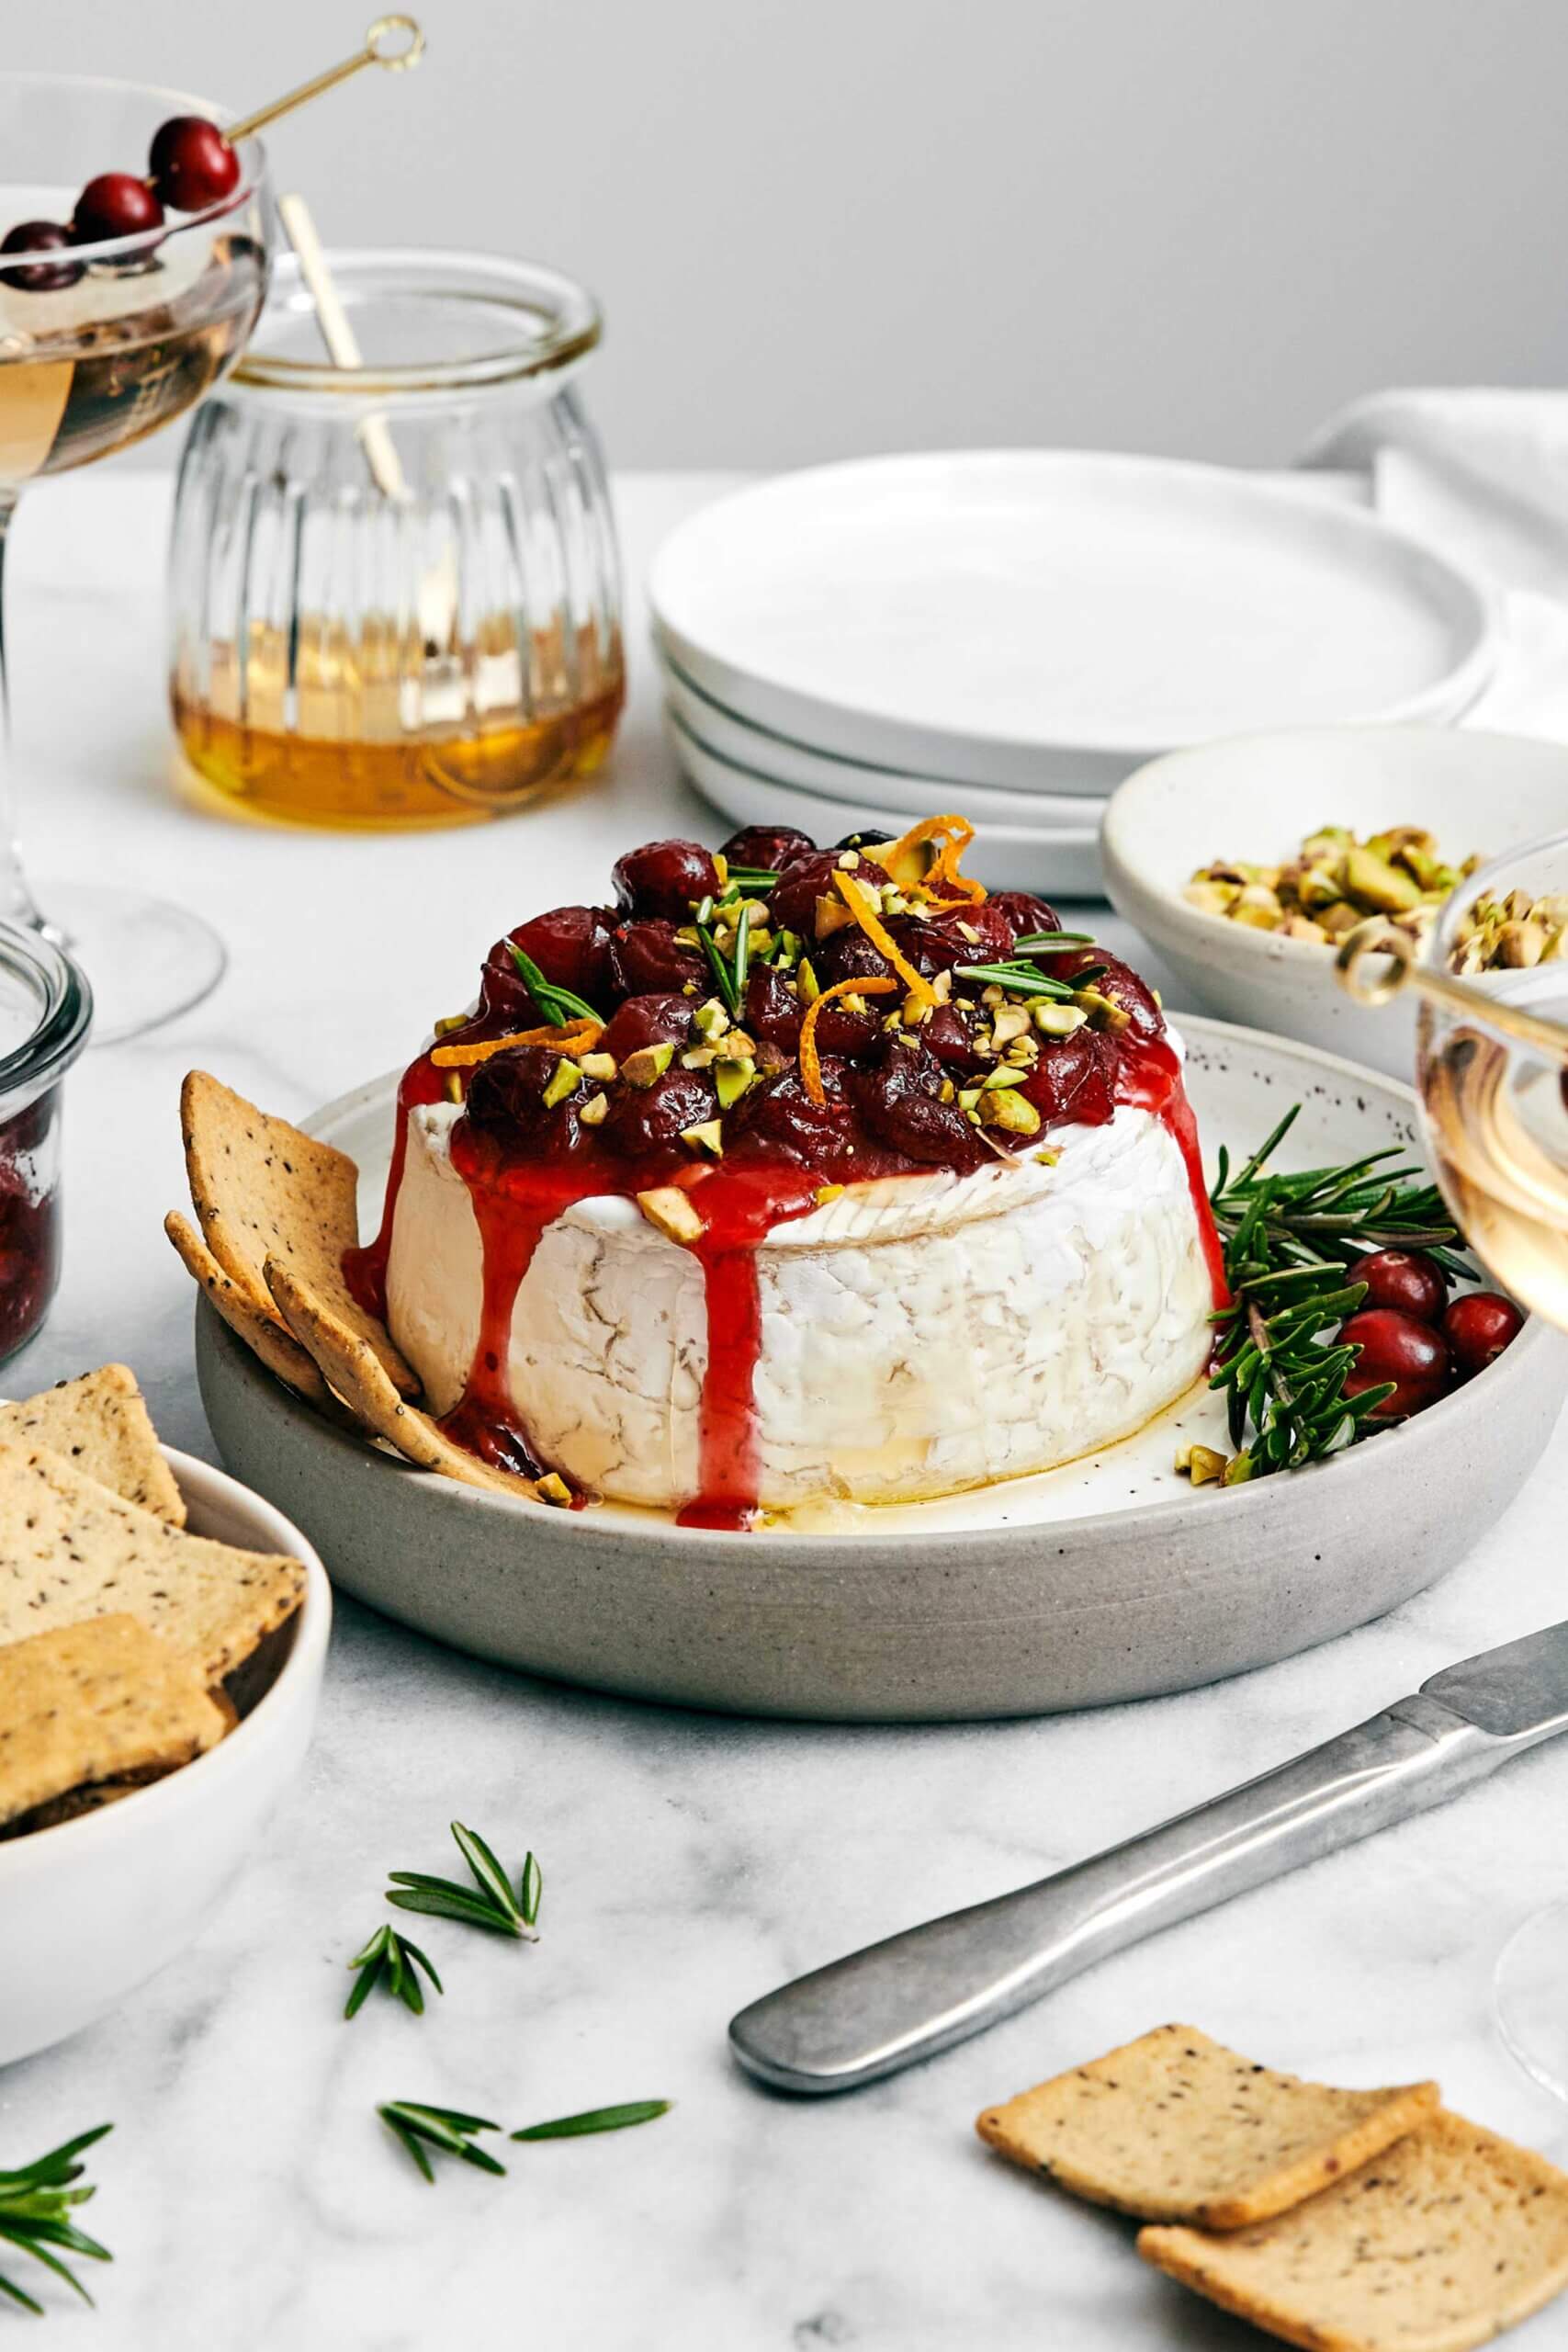 Baked brie with cranberry sauce.